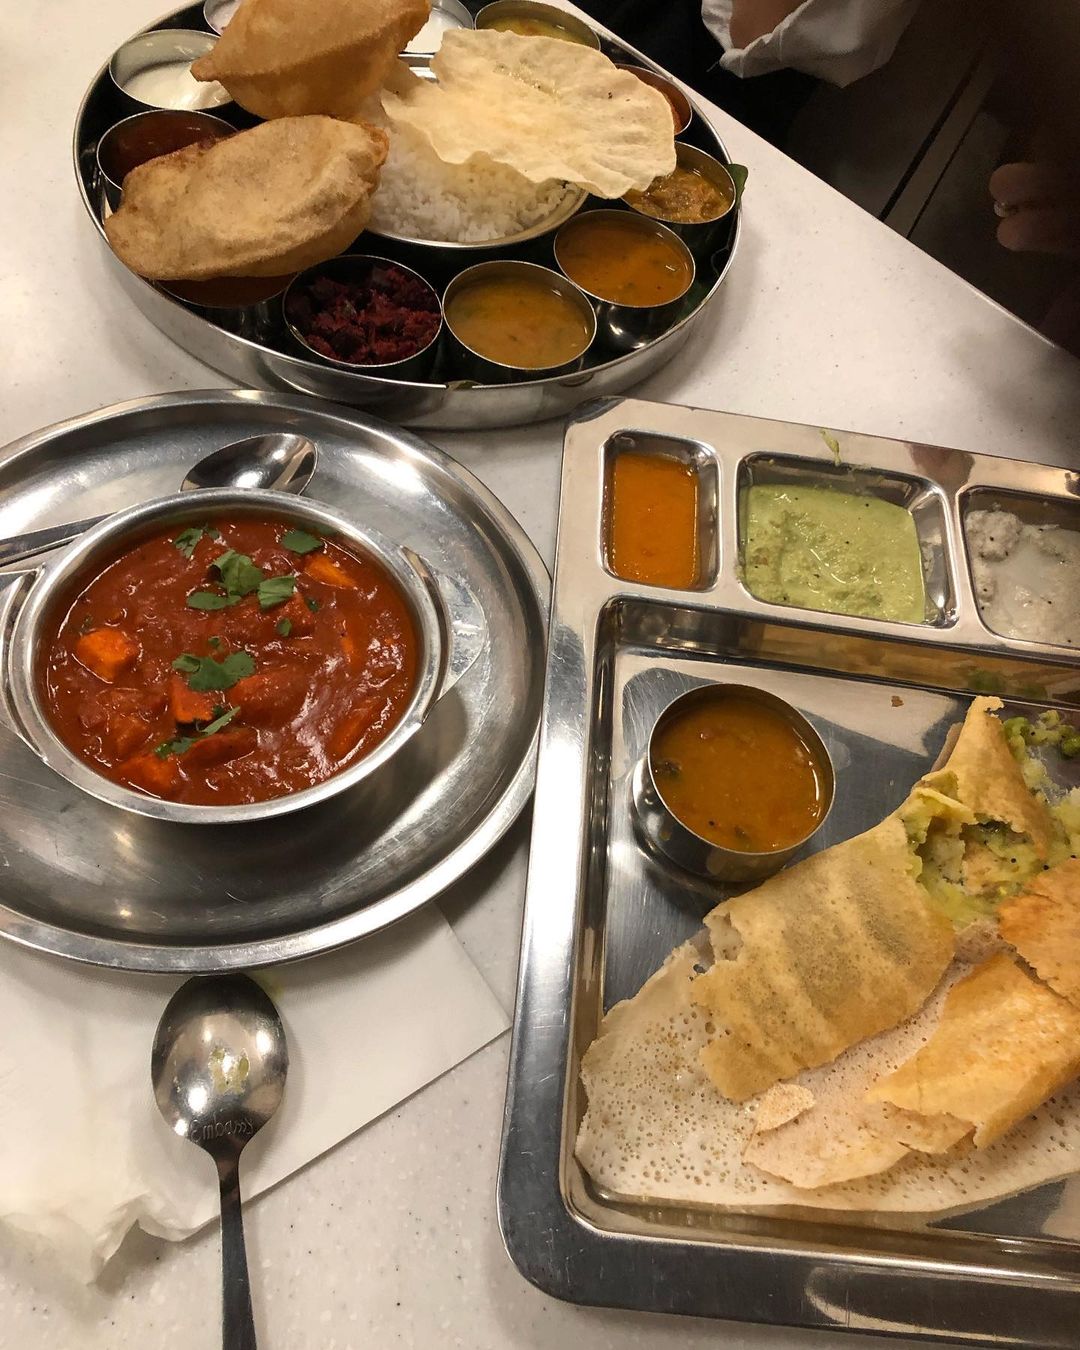 A platter of food including a Northern Indian curry at Saravana Bhavan.